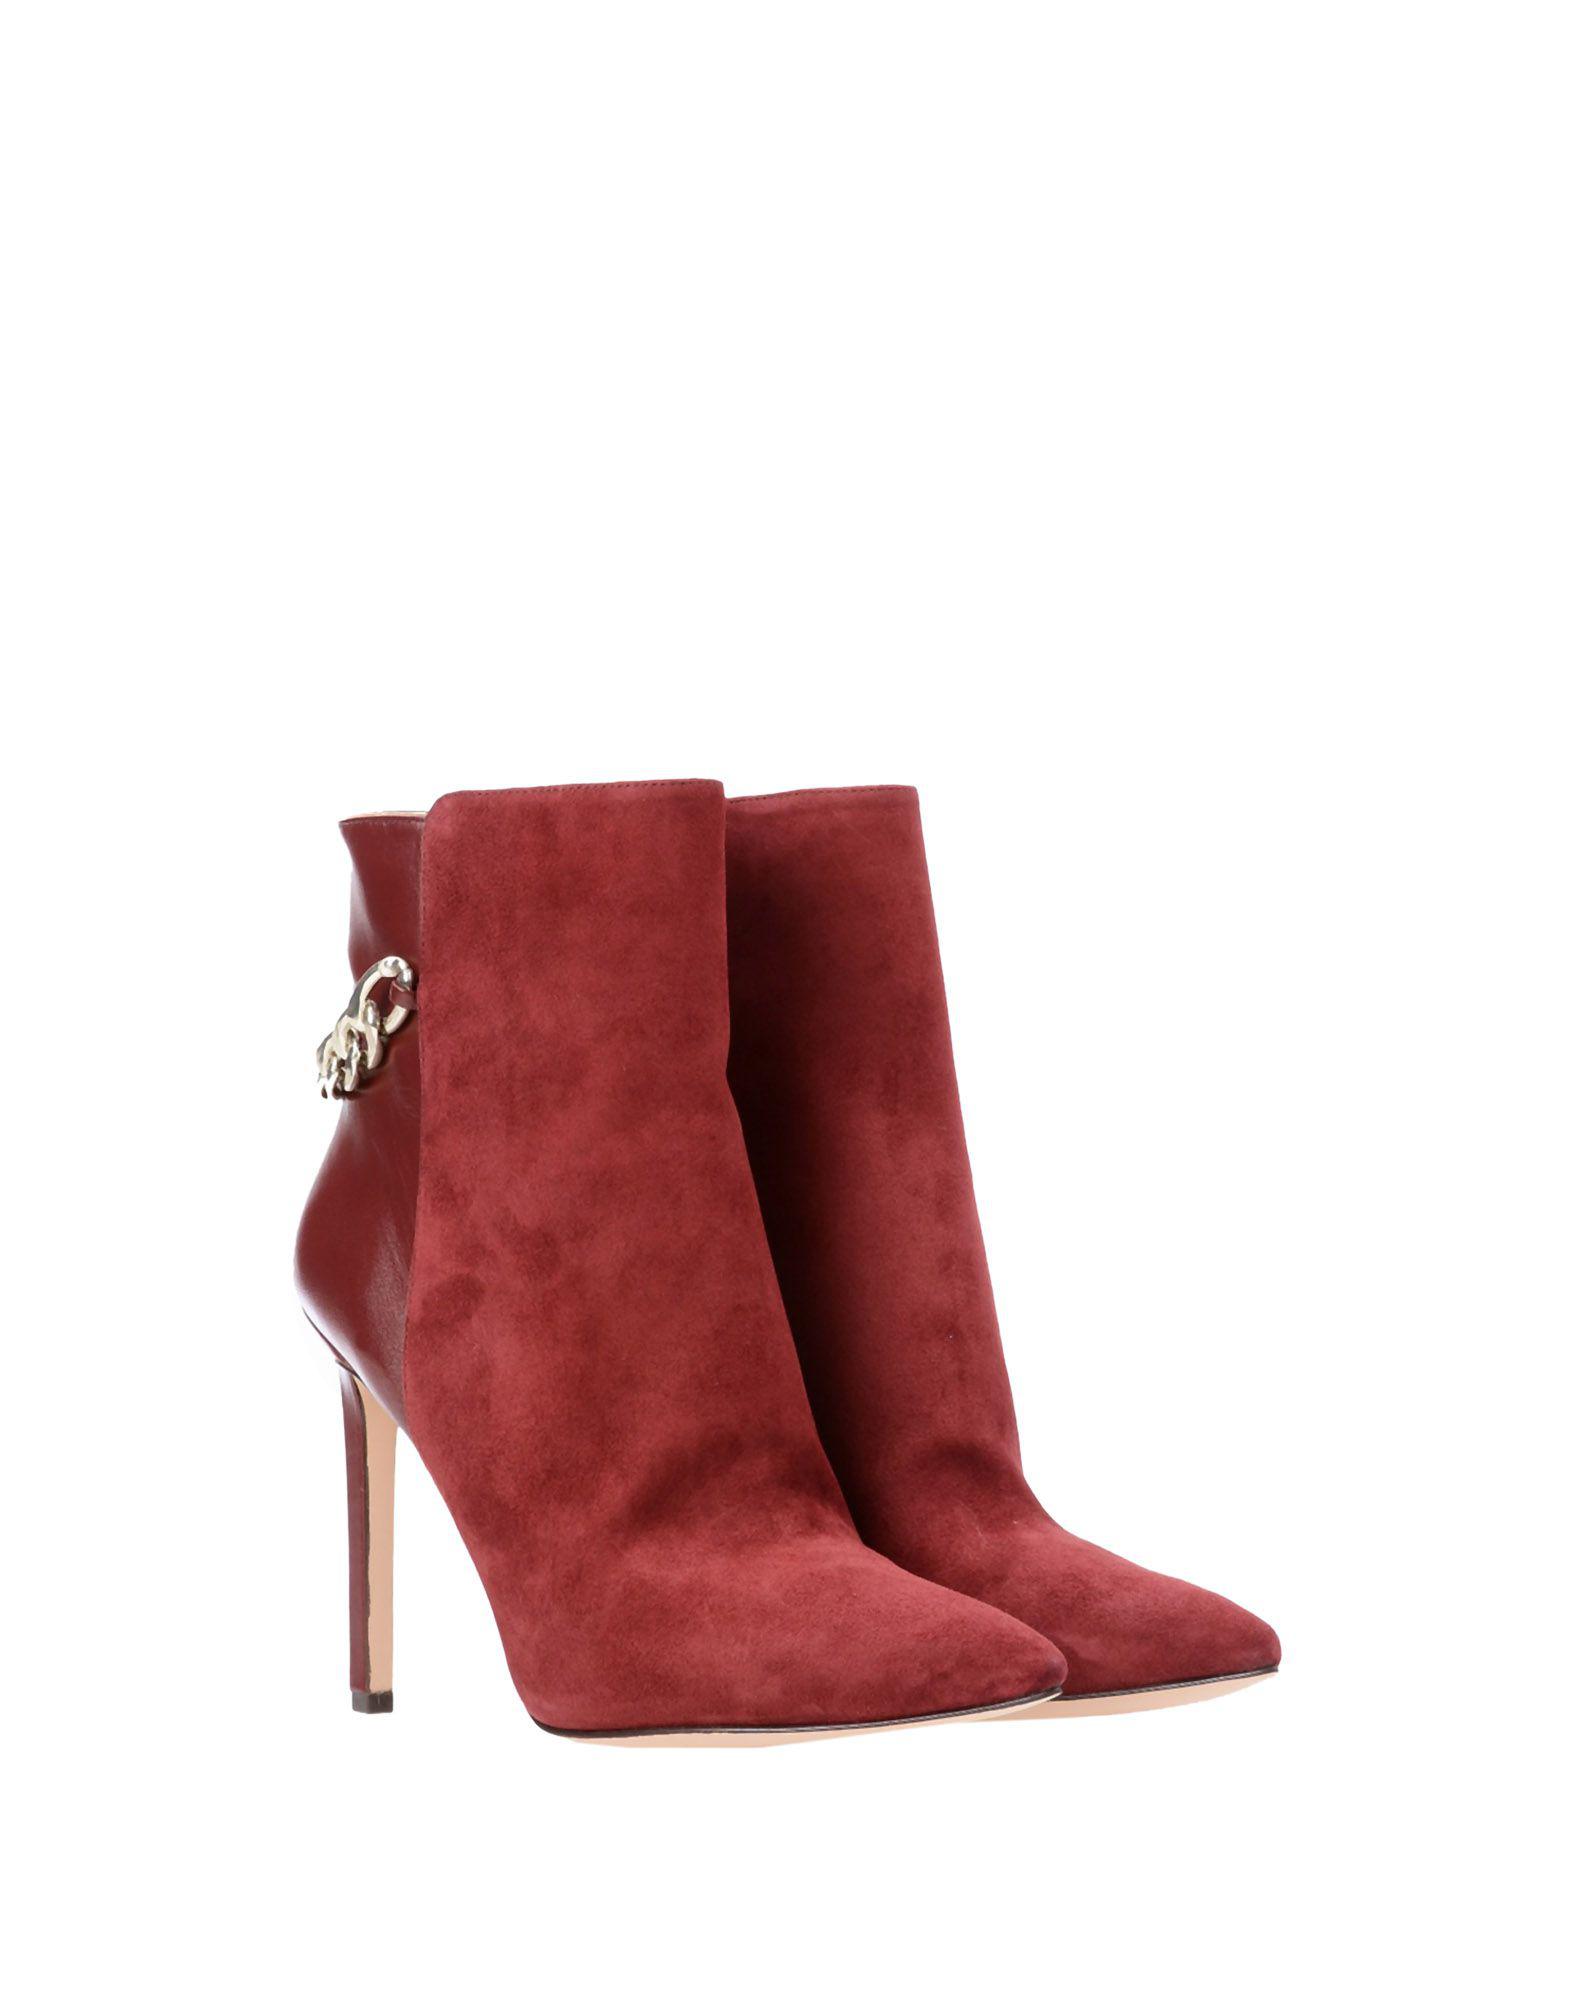 Nine West Leather Ankle Boots in Garnet 